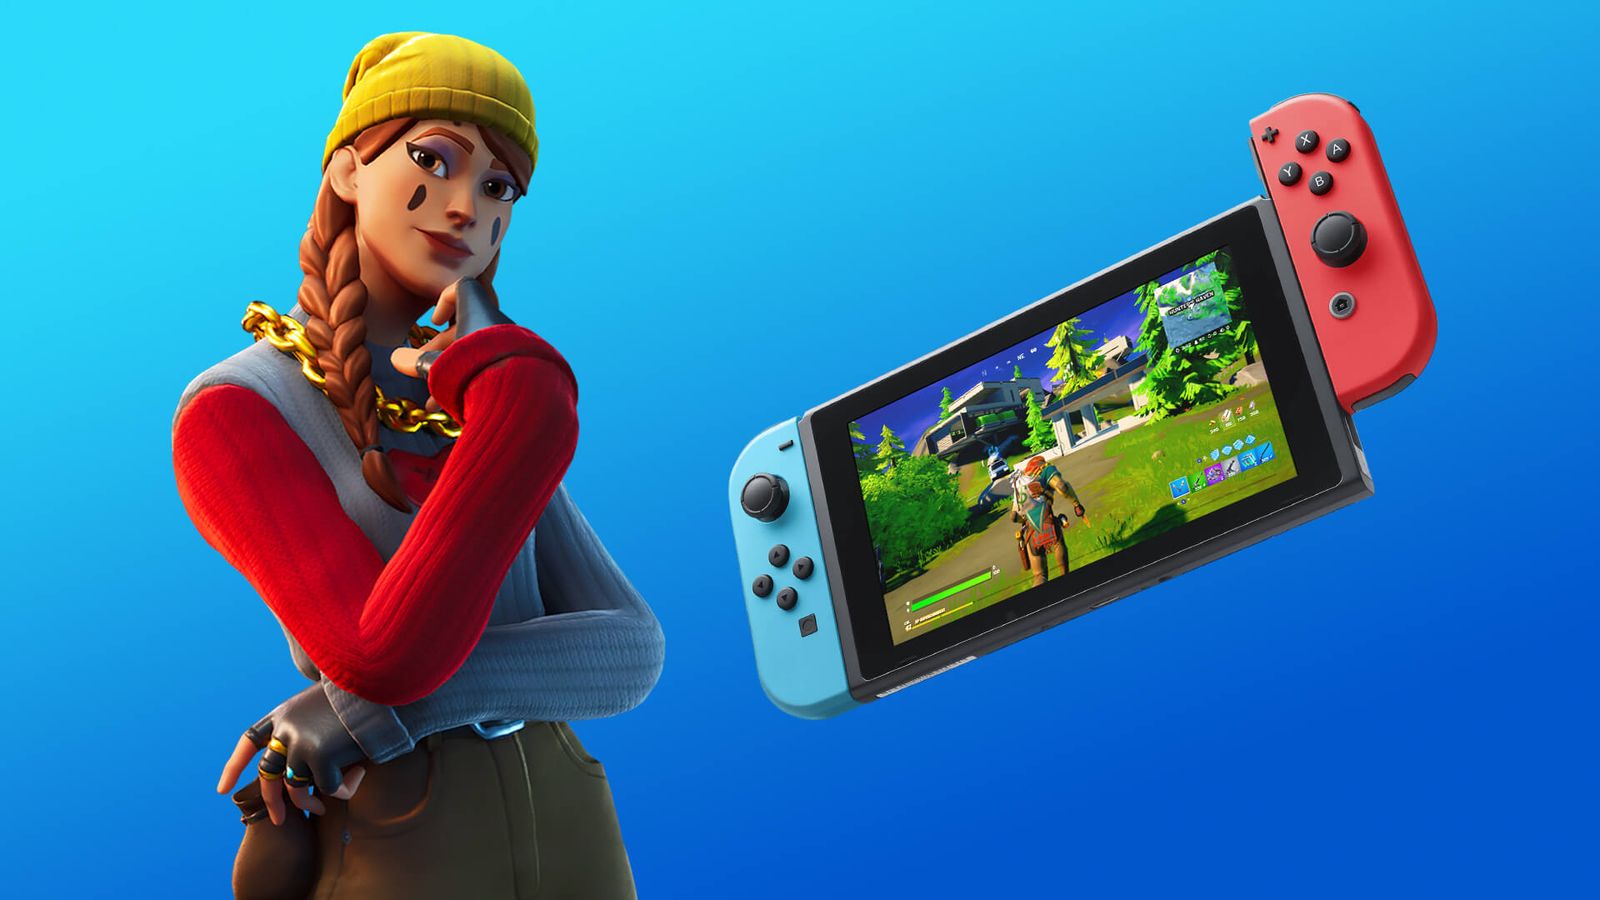 A promotional image showing Fortnite on the Nintendo Switch